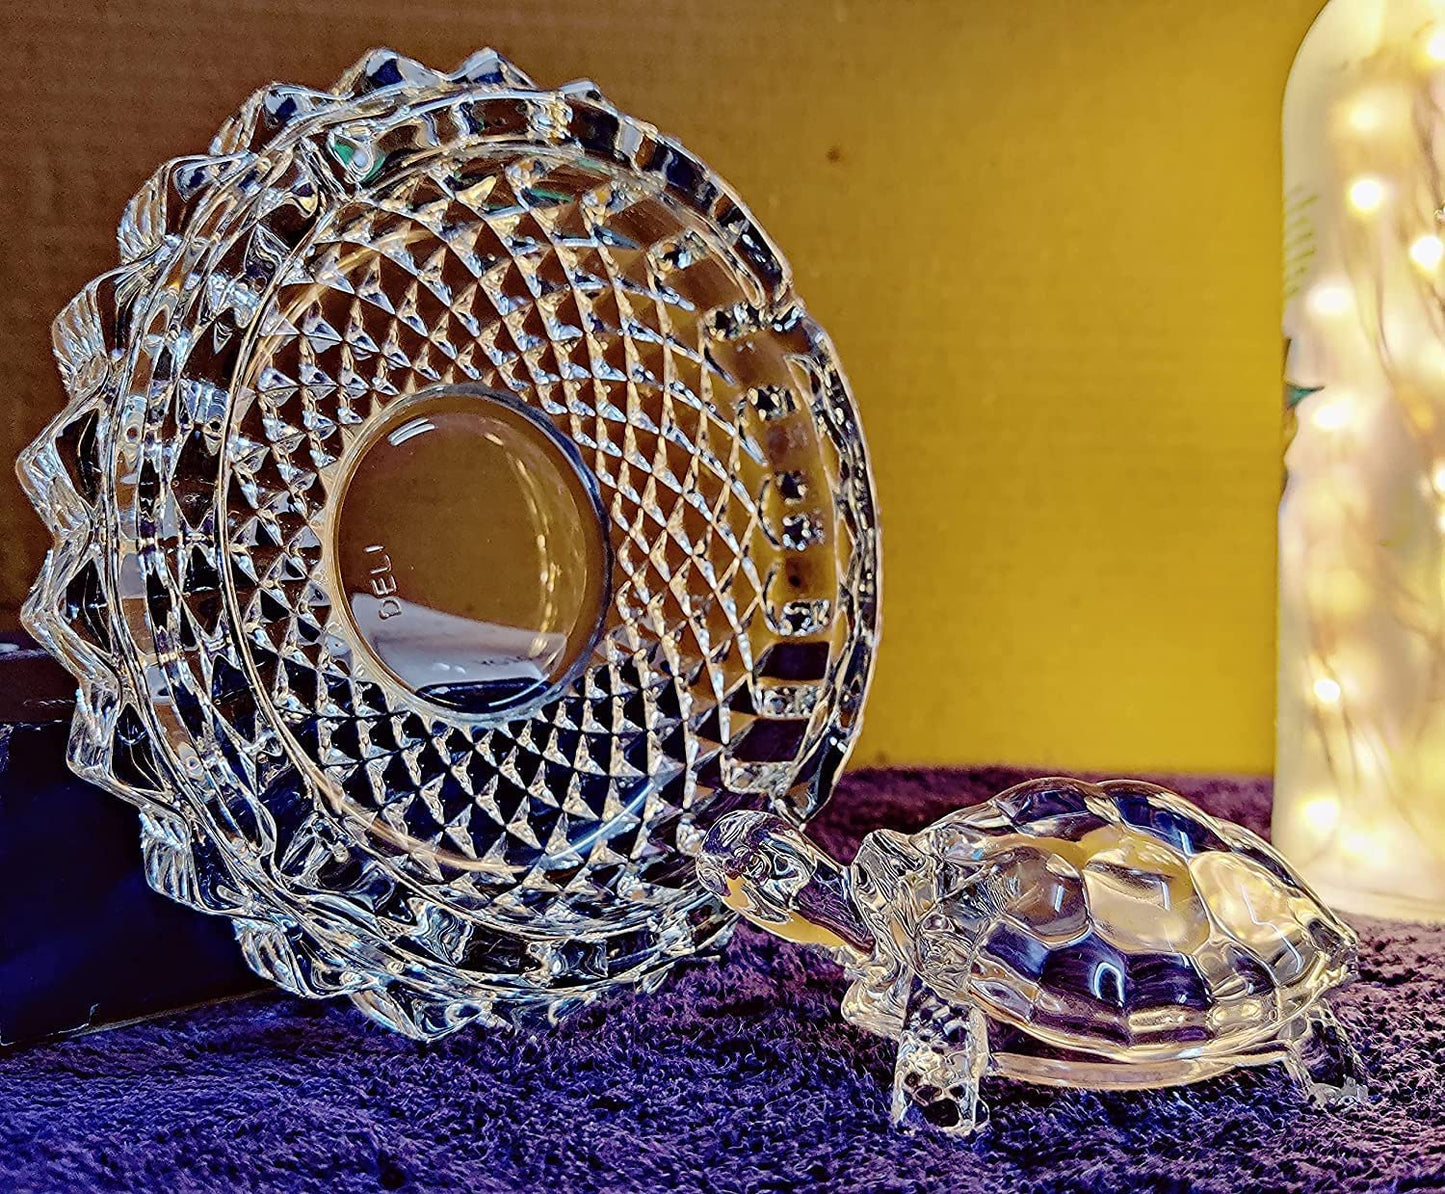 Crystal Tortoise Glass turtle with Beautiful Bowl Plate Vastu Set for Good Luck.